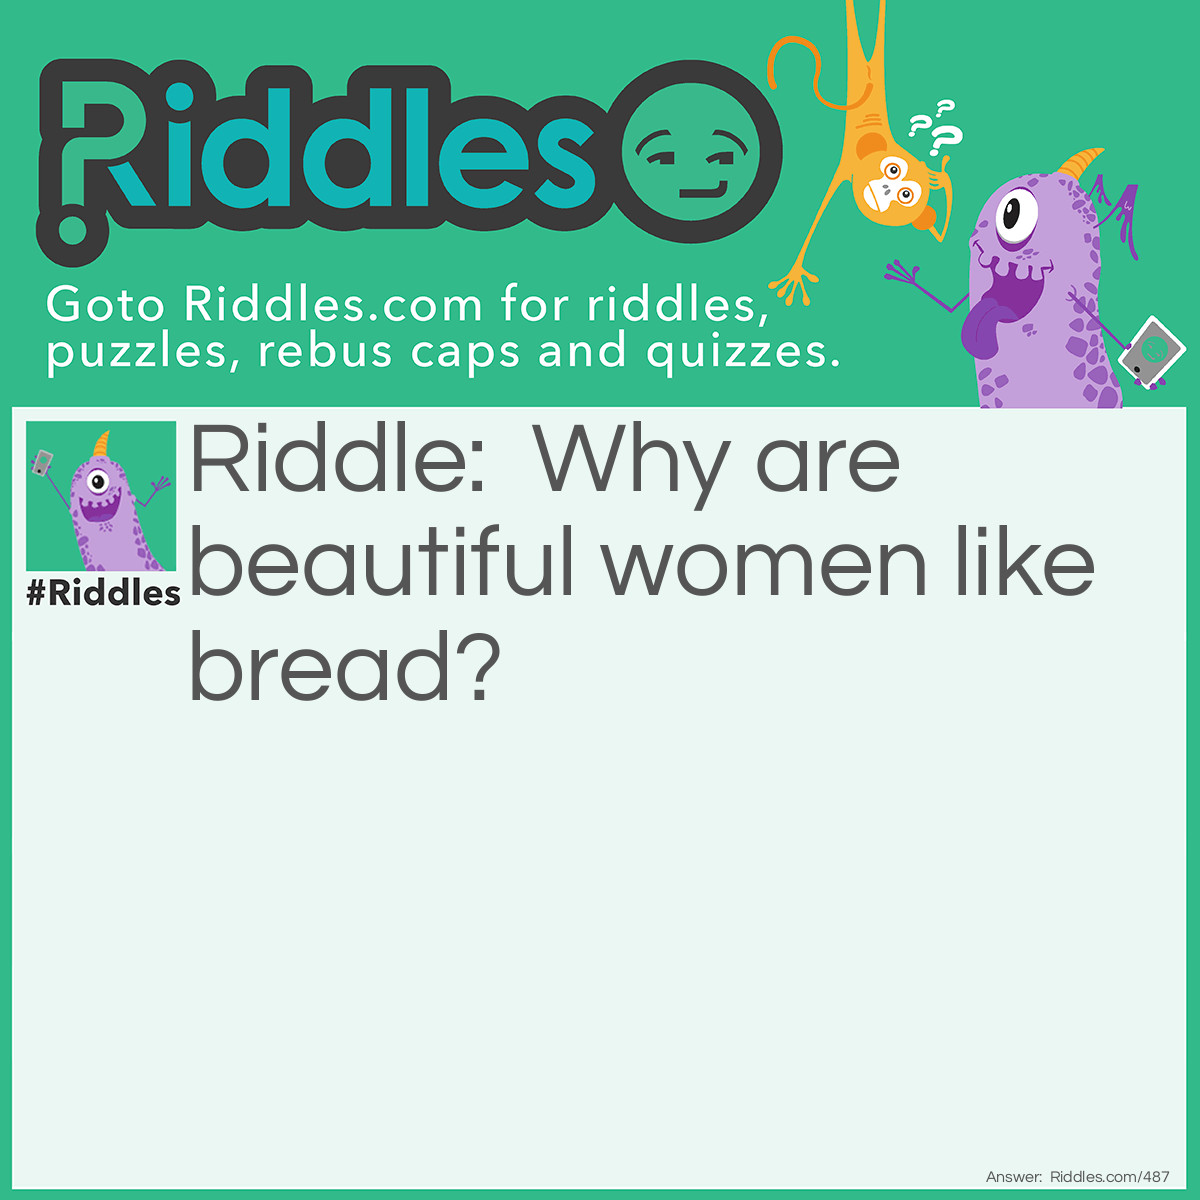 Riddle: Why are beautiful women like bread? Answer: Because they are often toasted.